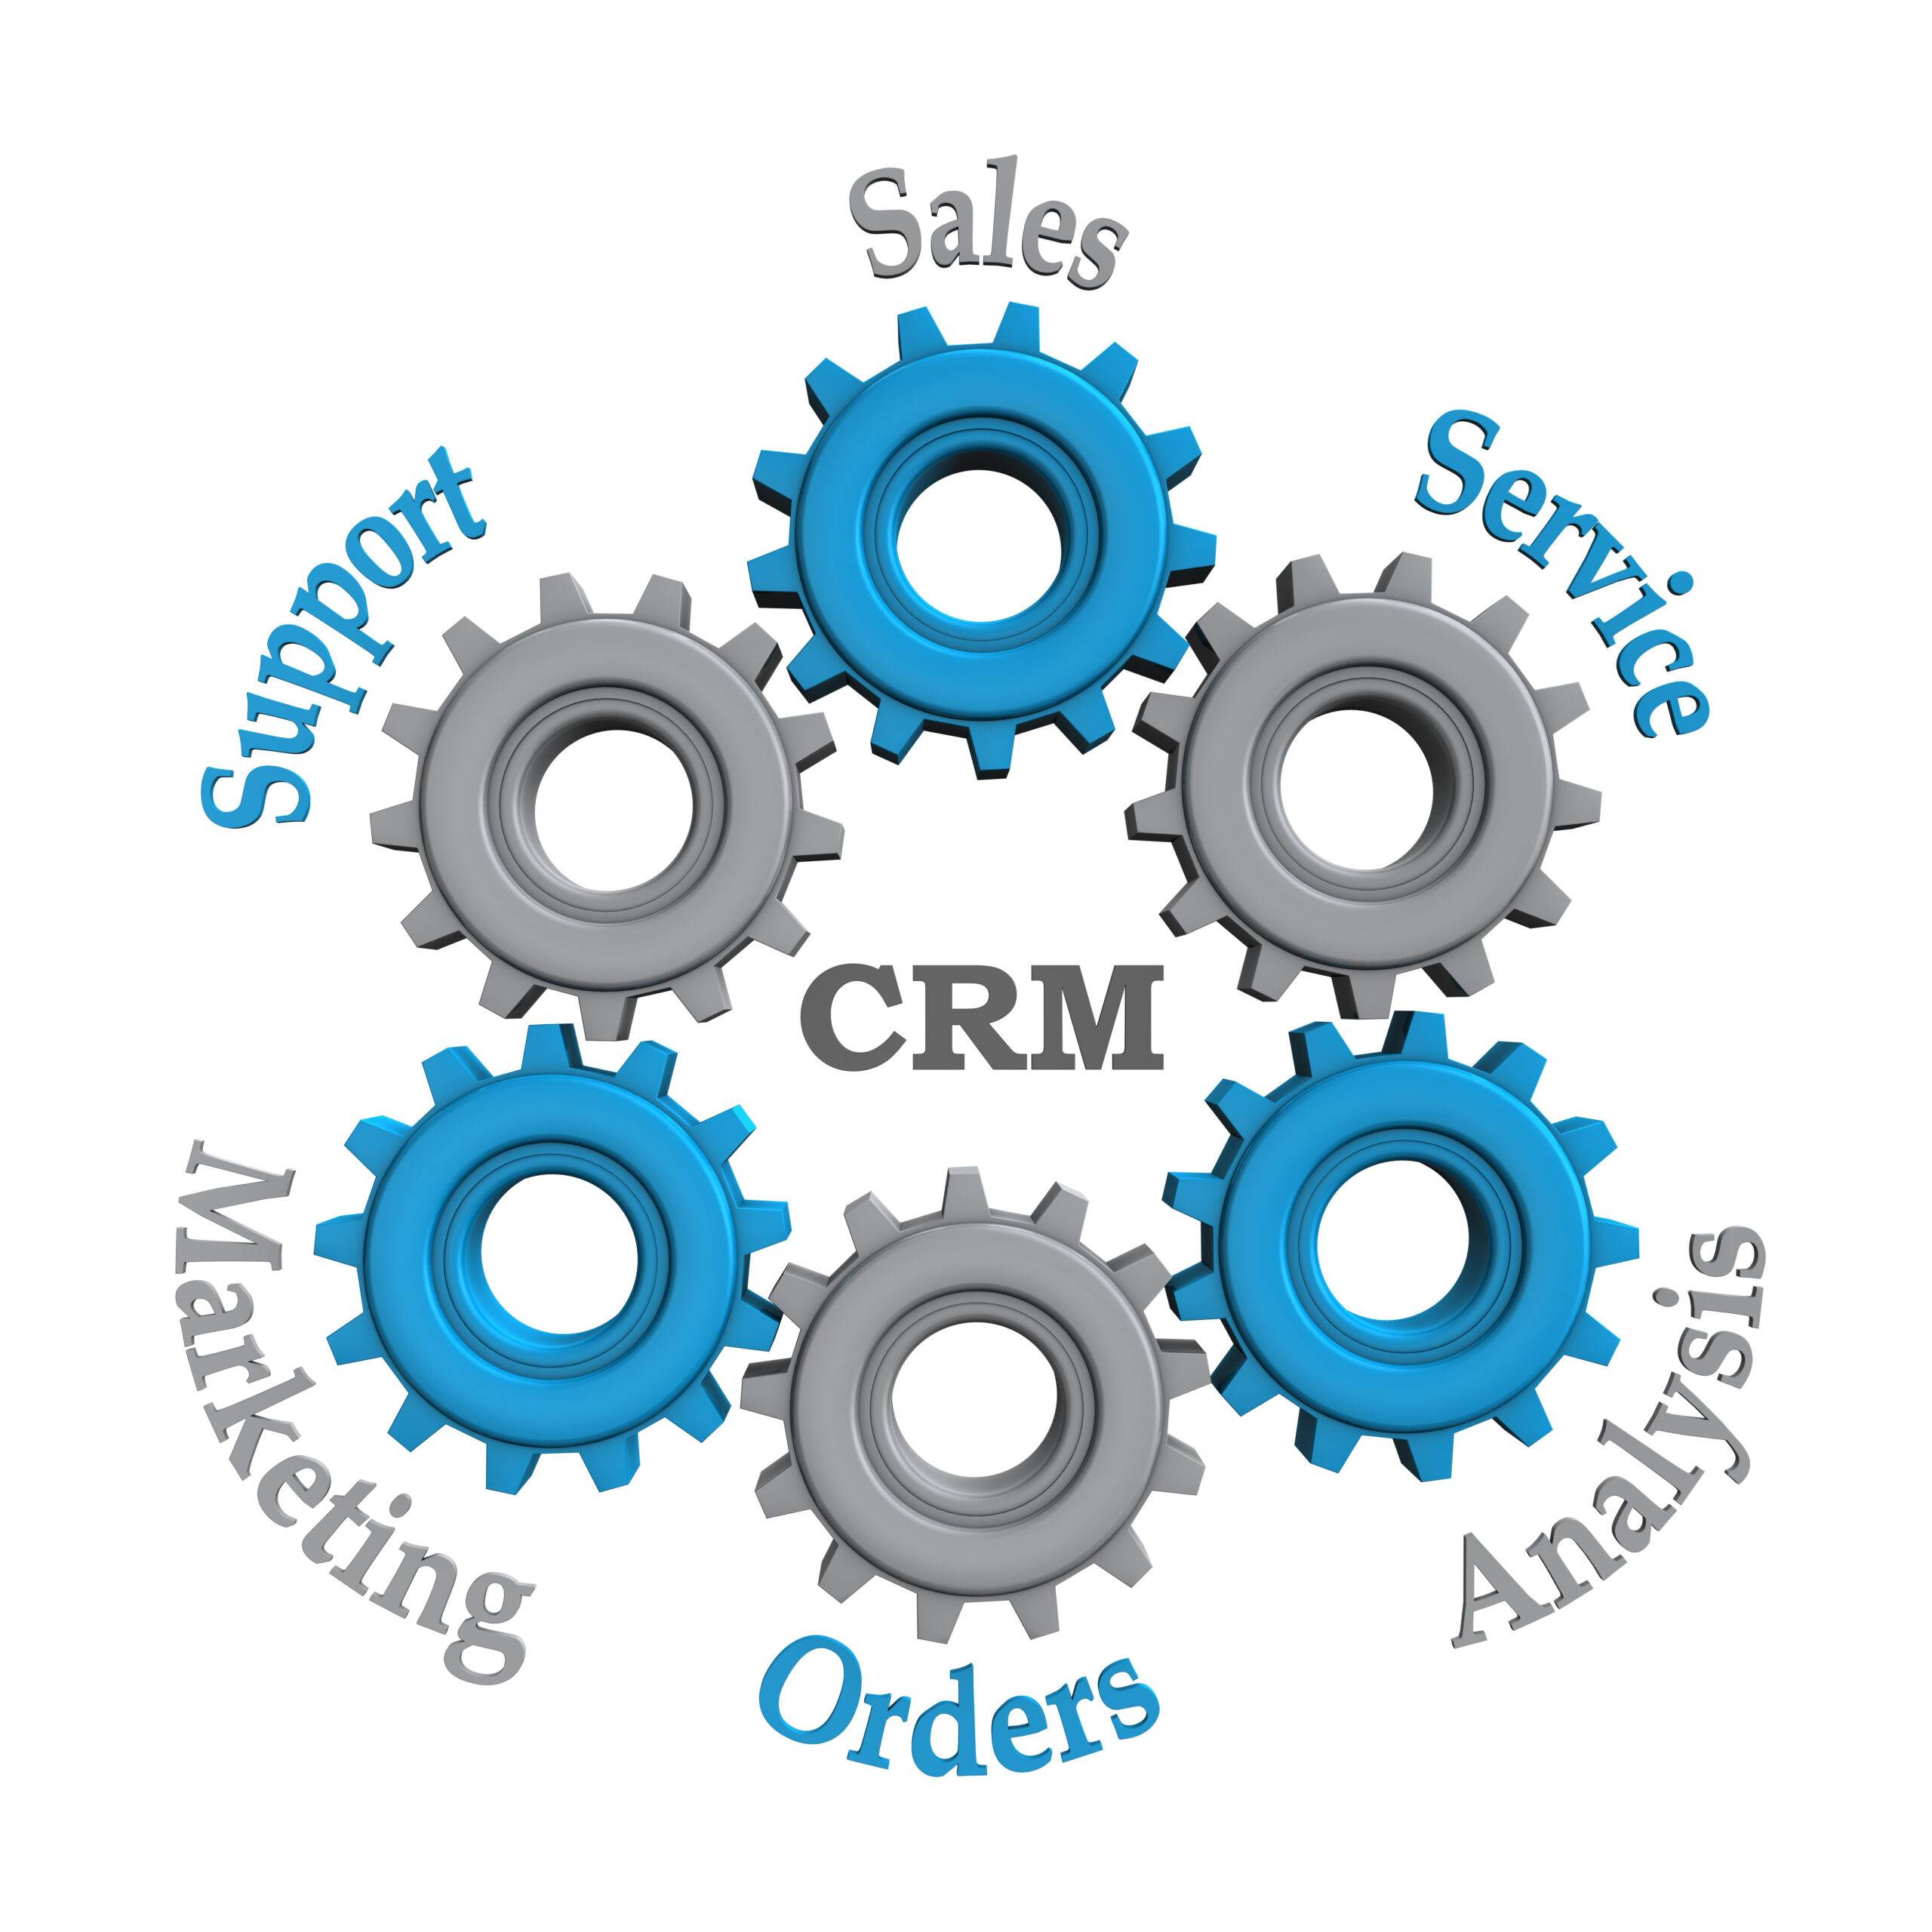 CRM designed for broadcast and media, radio and tv workflow